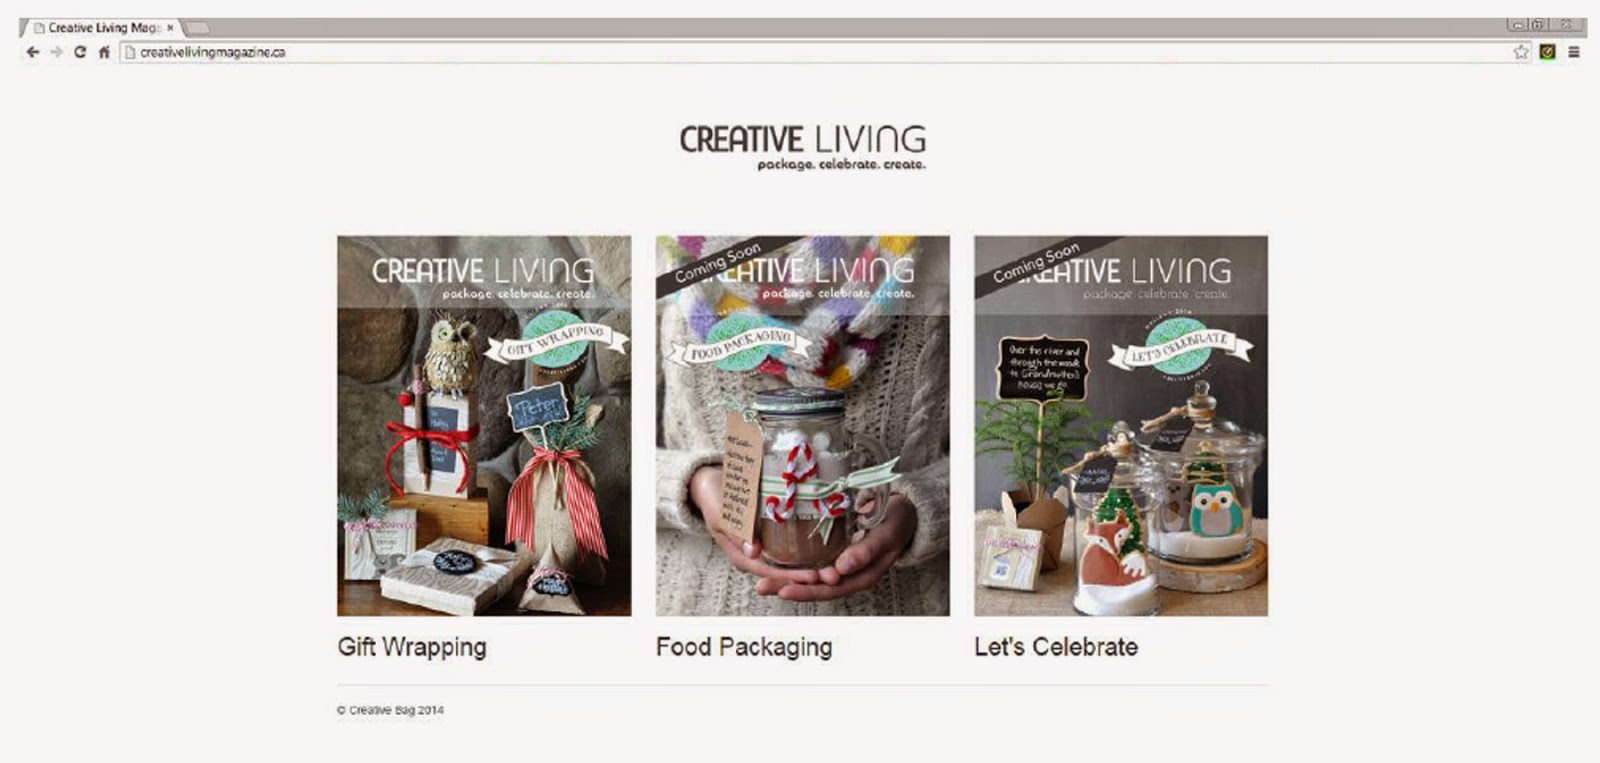 Creative Living Magazines by Creative Bag 